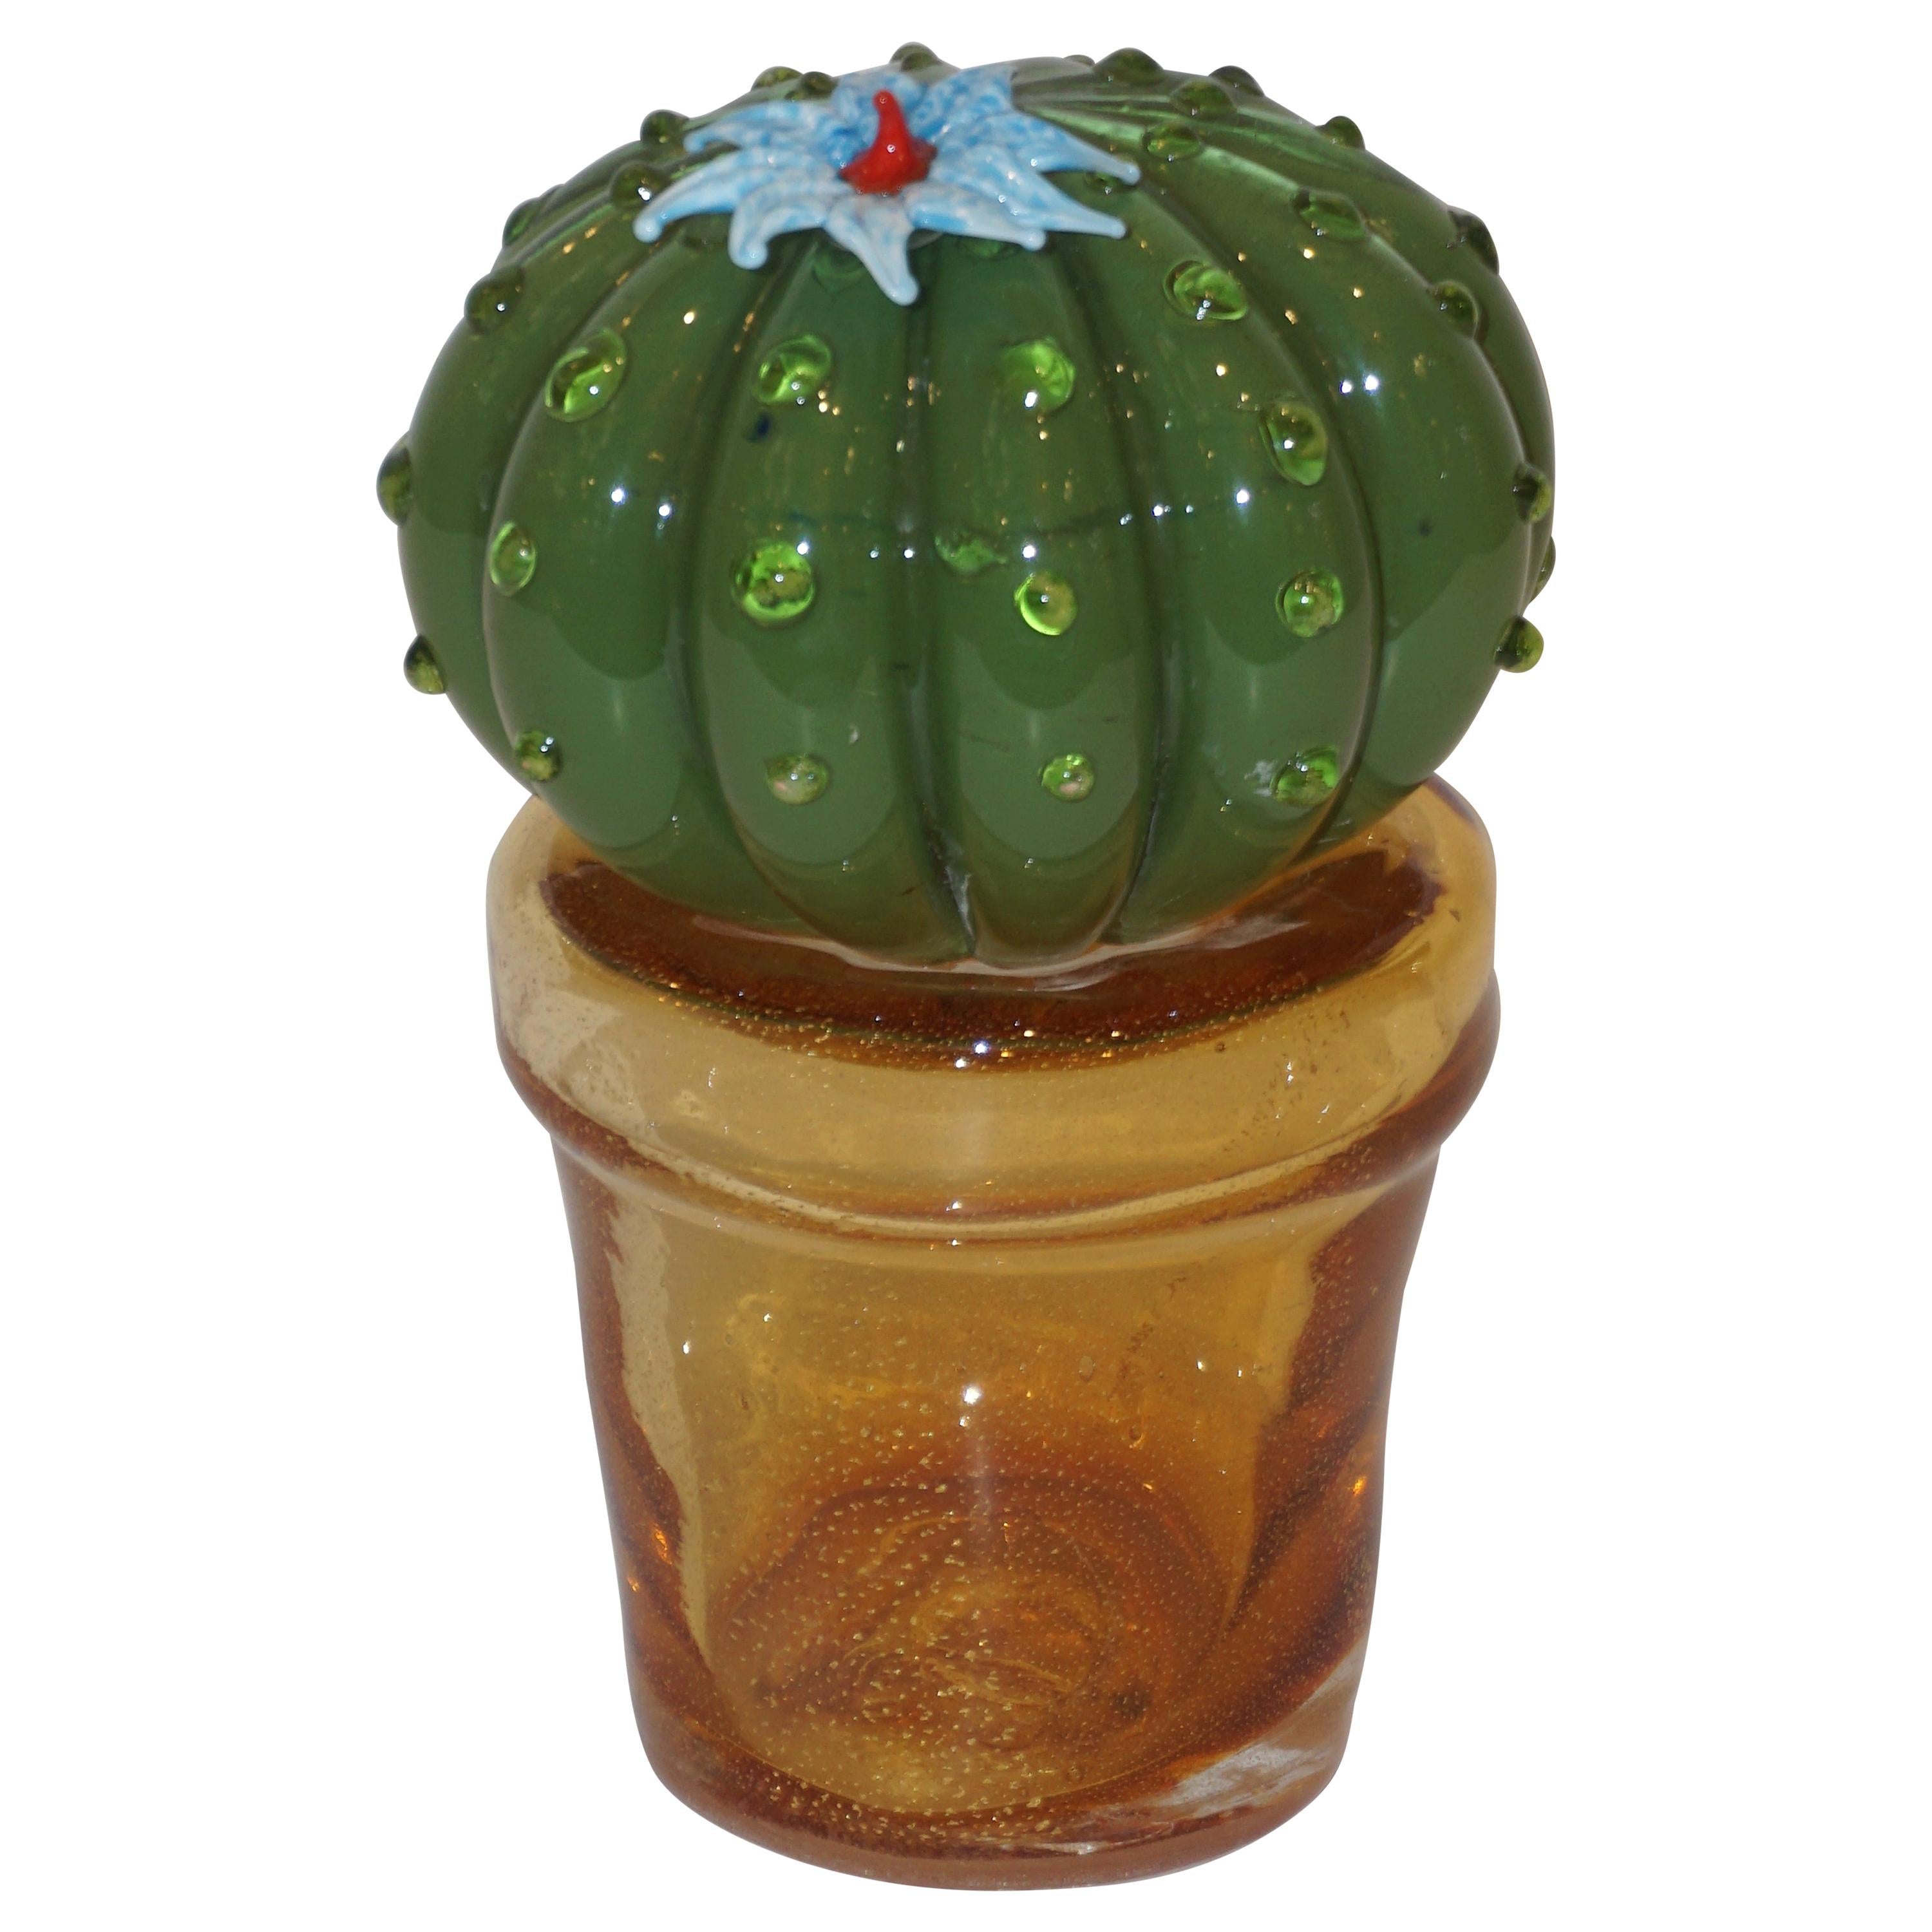 1990s Vintage Italian Green Murano Glass Small Cactus Plant with Blue Flower